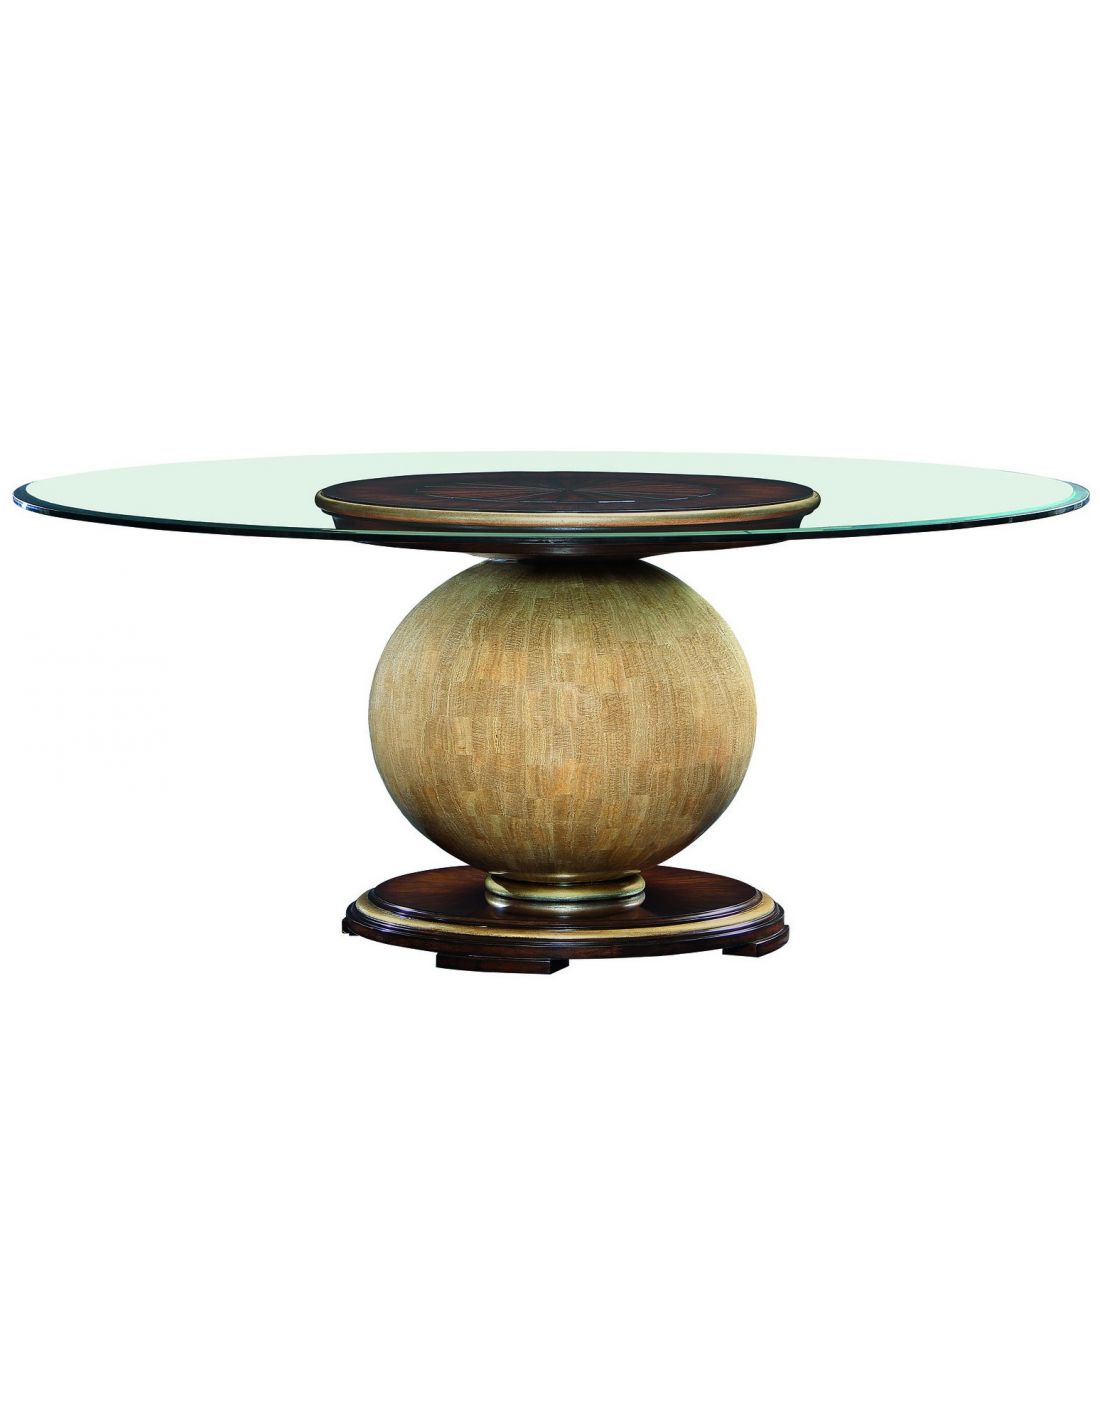 Round Glass Top And Wooden Spherical Base, Round Table Glass Top Wood Base